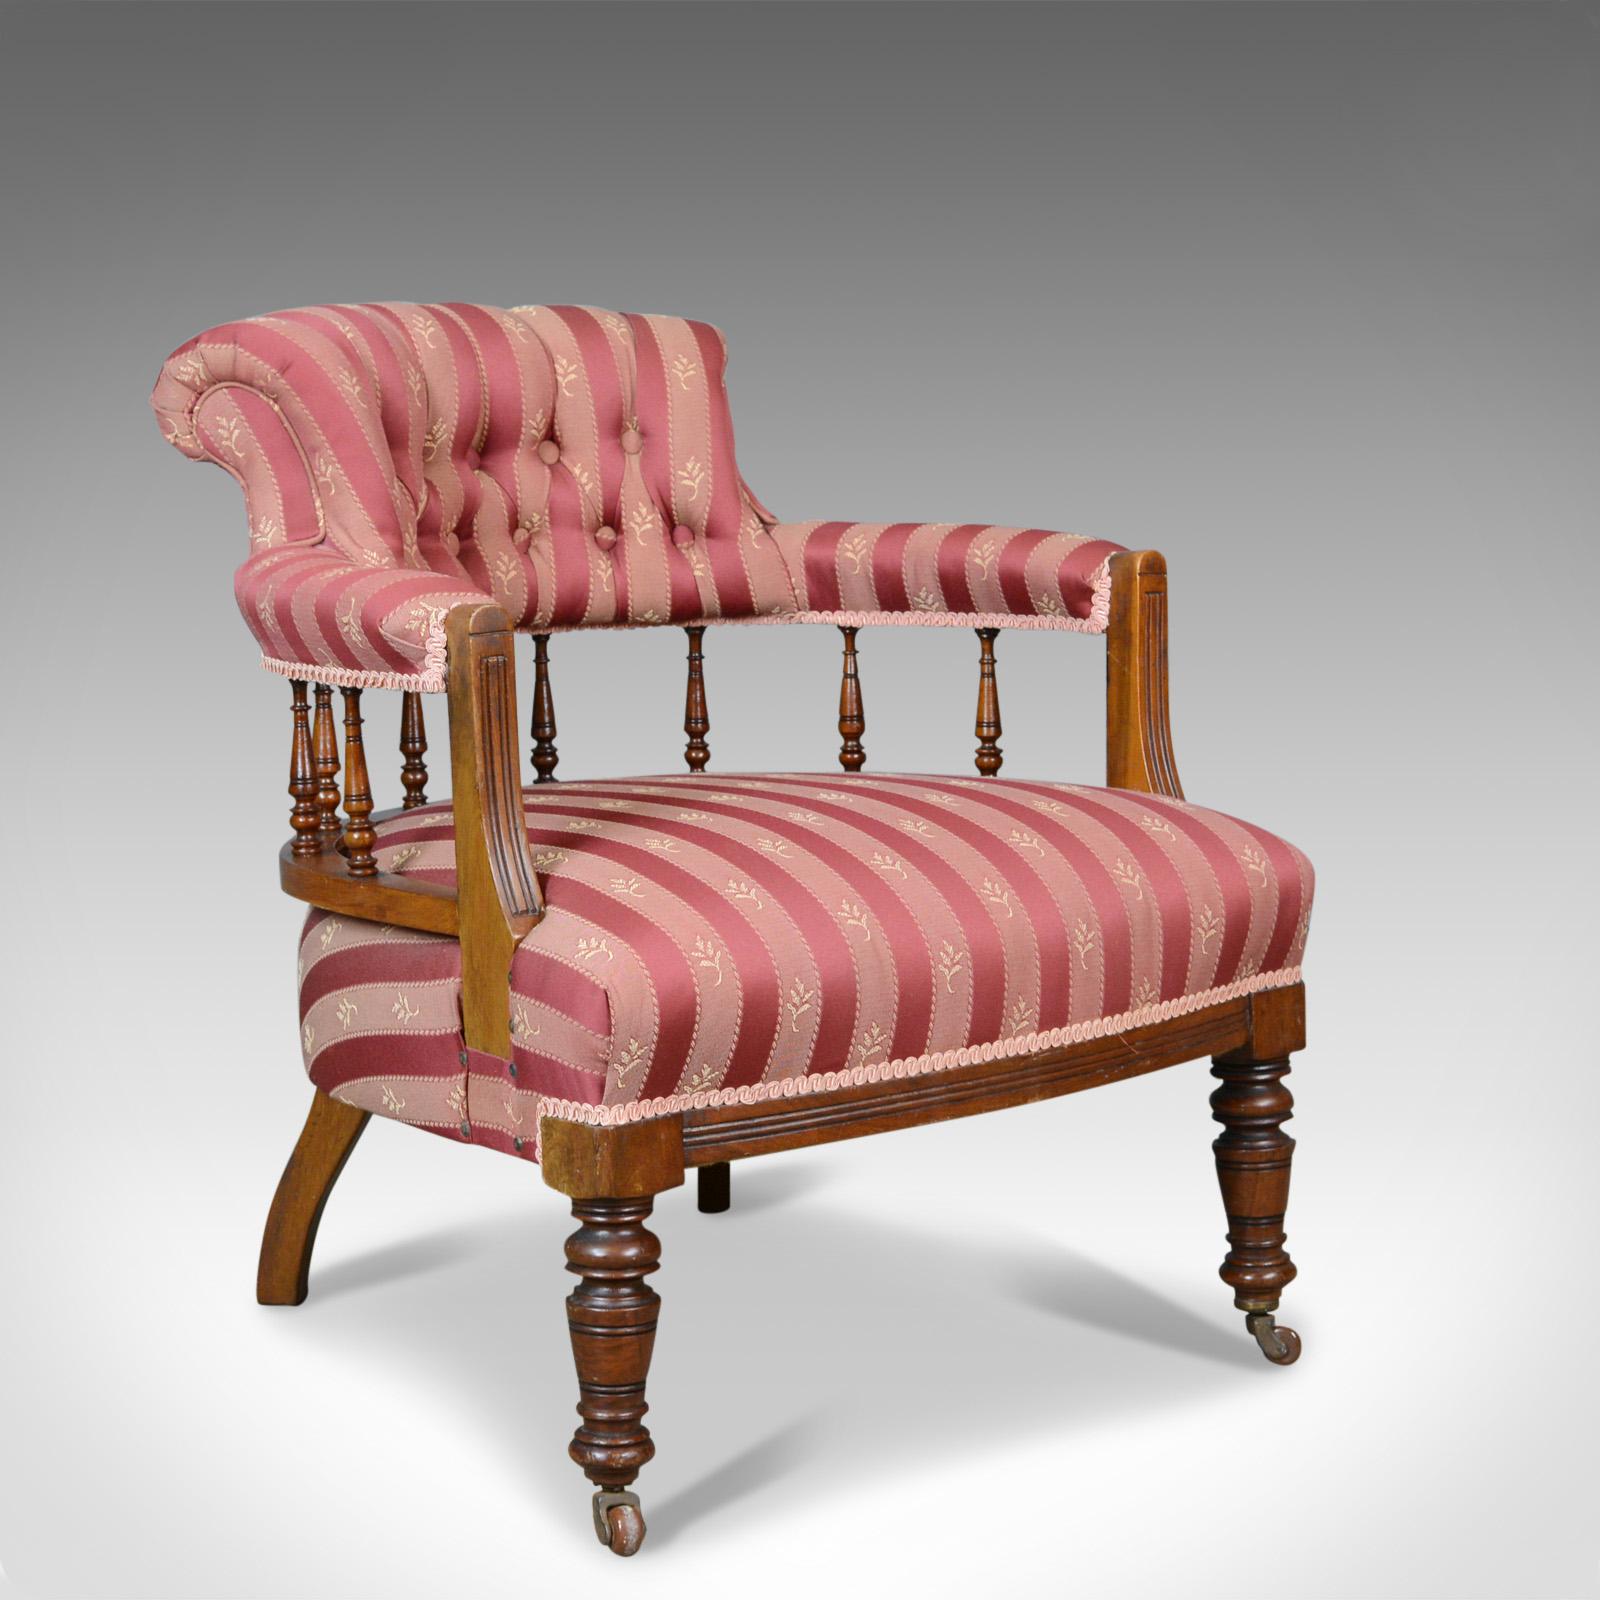 This is a pair of antique salon chairs, English, Edwardian scroll back bedroom armchairs displaying classical overtones and dating to circa 1910.

Sumptuous broad and plump comfortable seats
Well sprung and traditionally stuffed
Finished in a